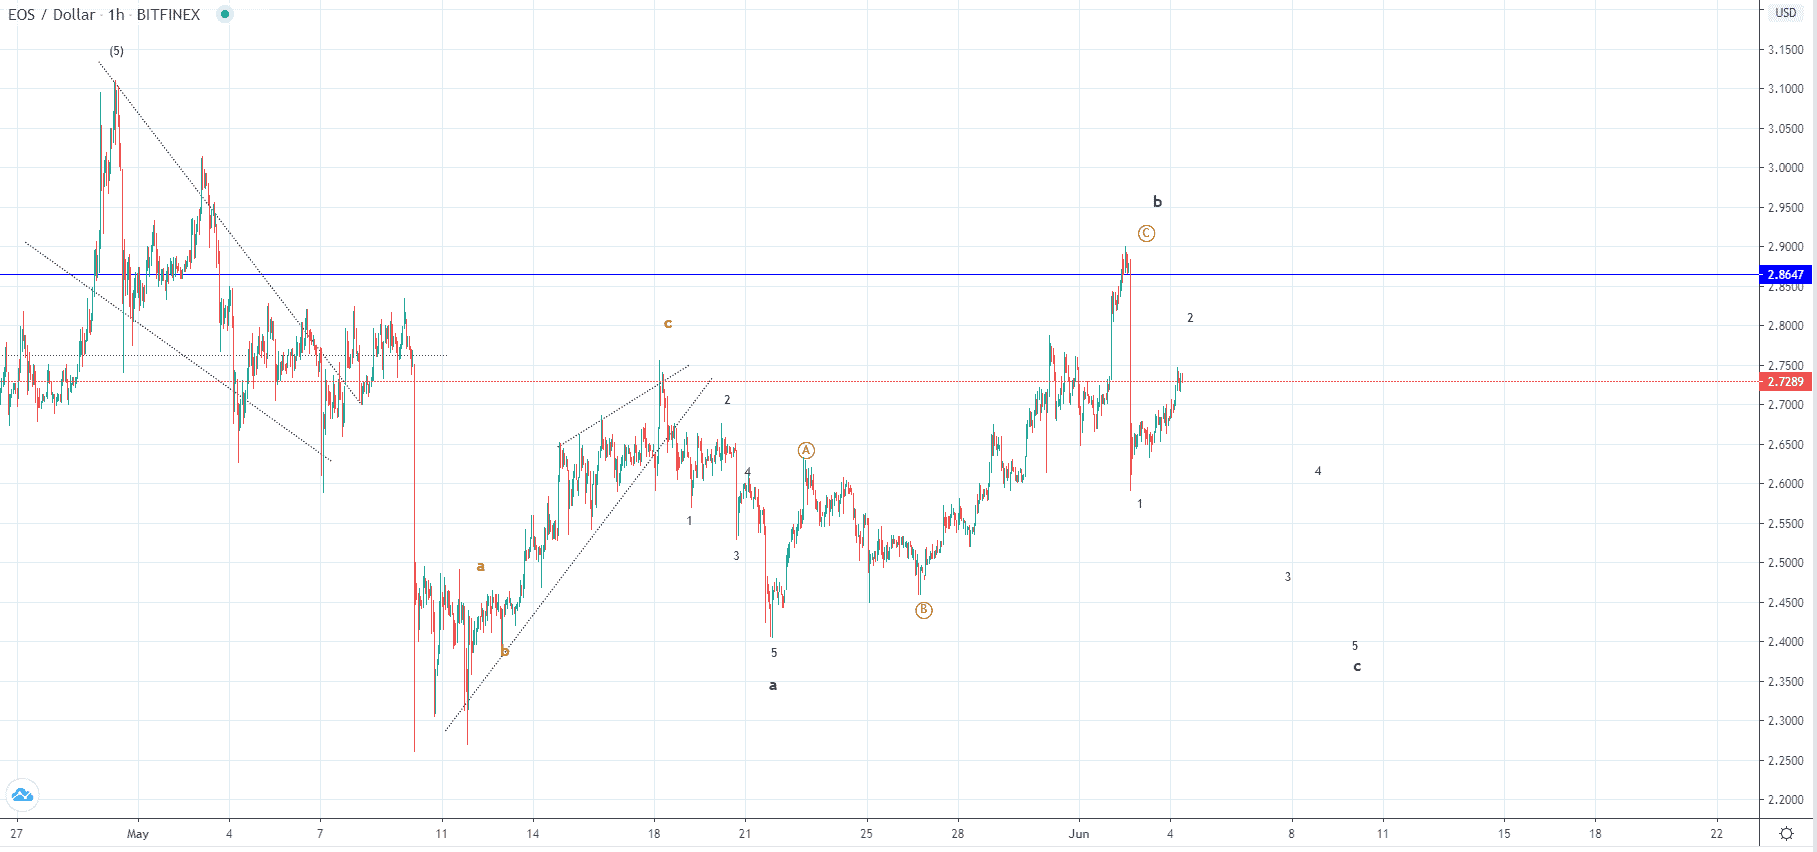 LTC and EOS - Price recovery considered corrective